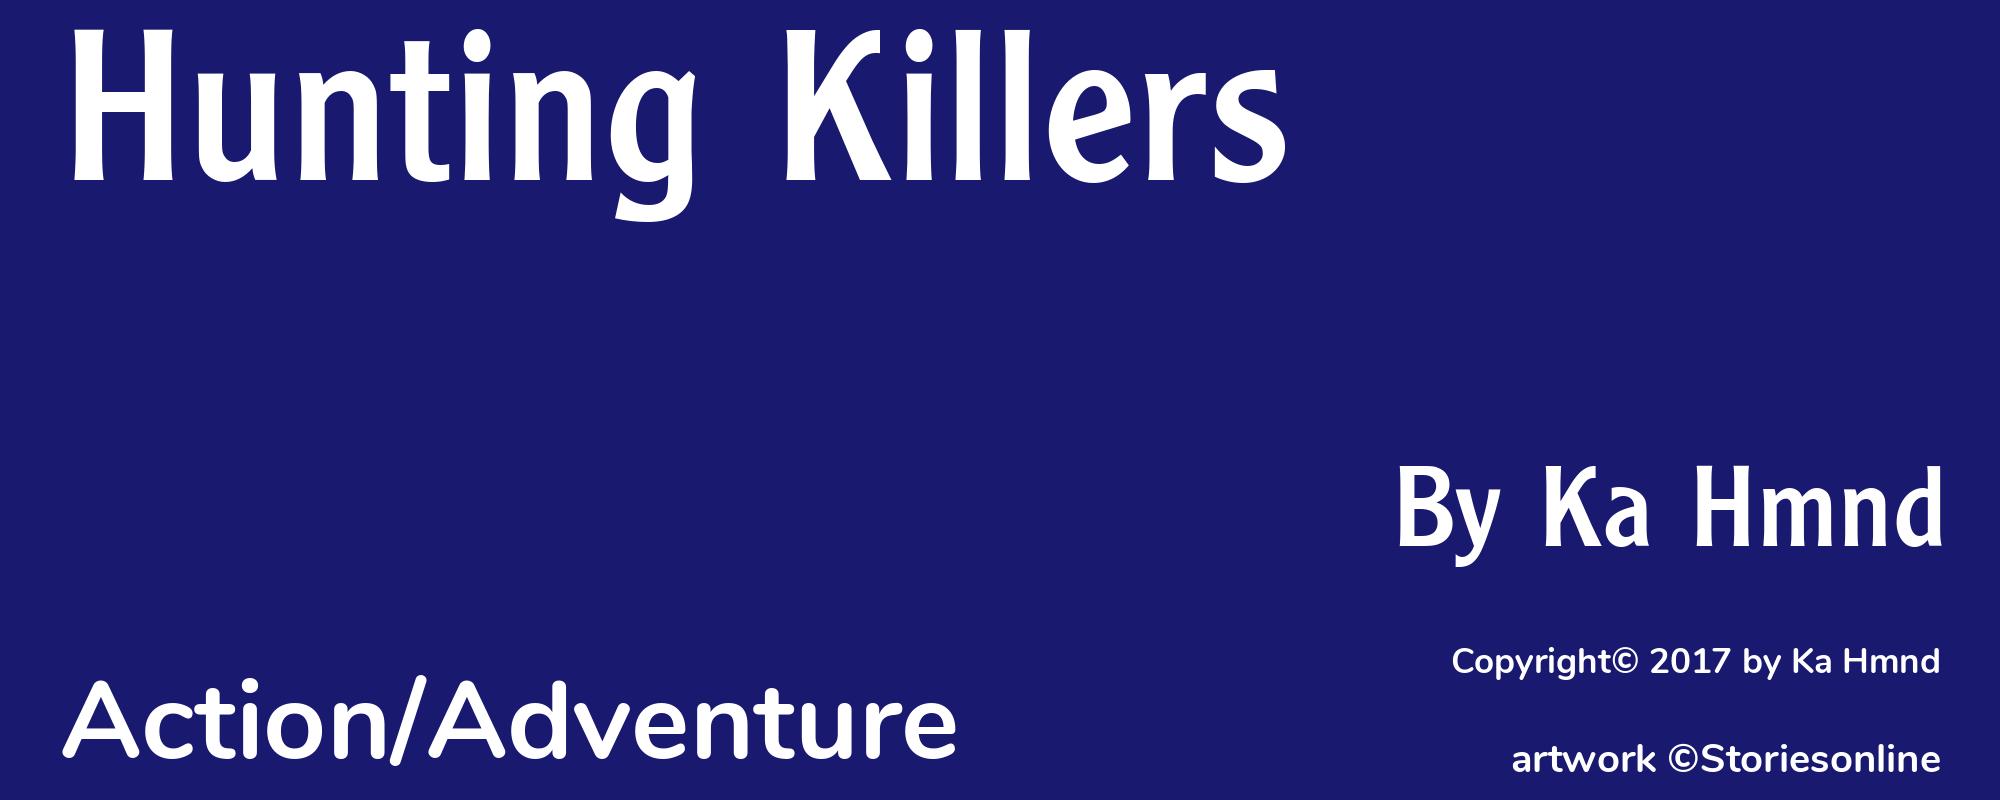 Hunting Killers - Cover